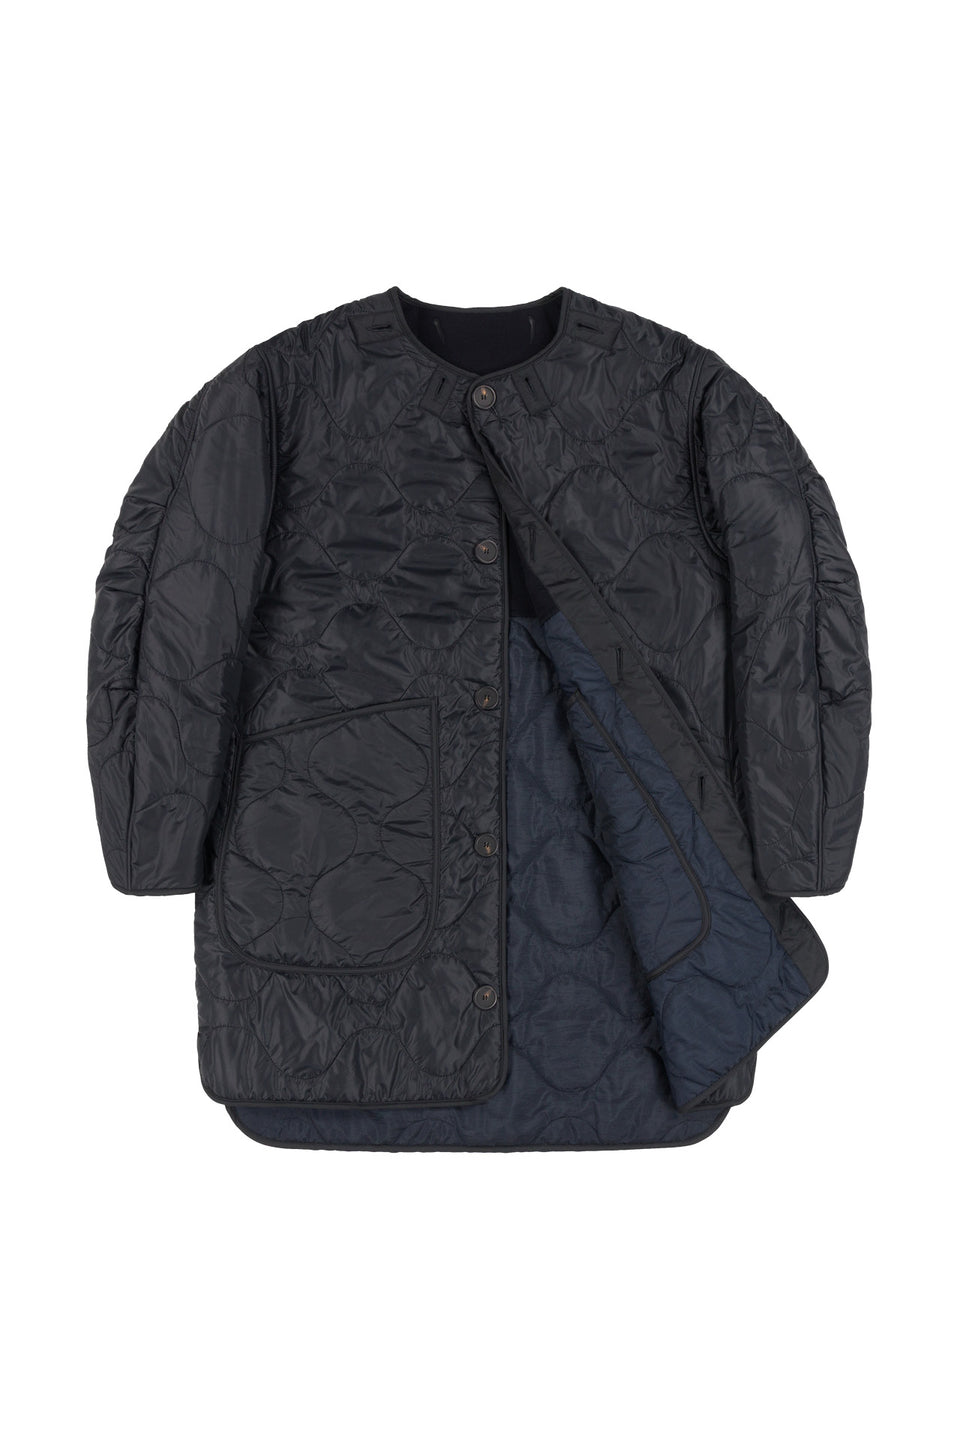 Wool Quilt Jacket - Navy / Black (listing page thumbnail)